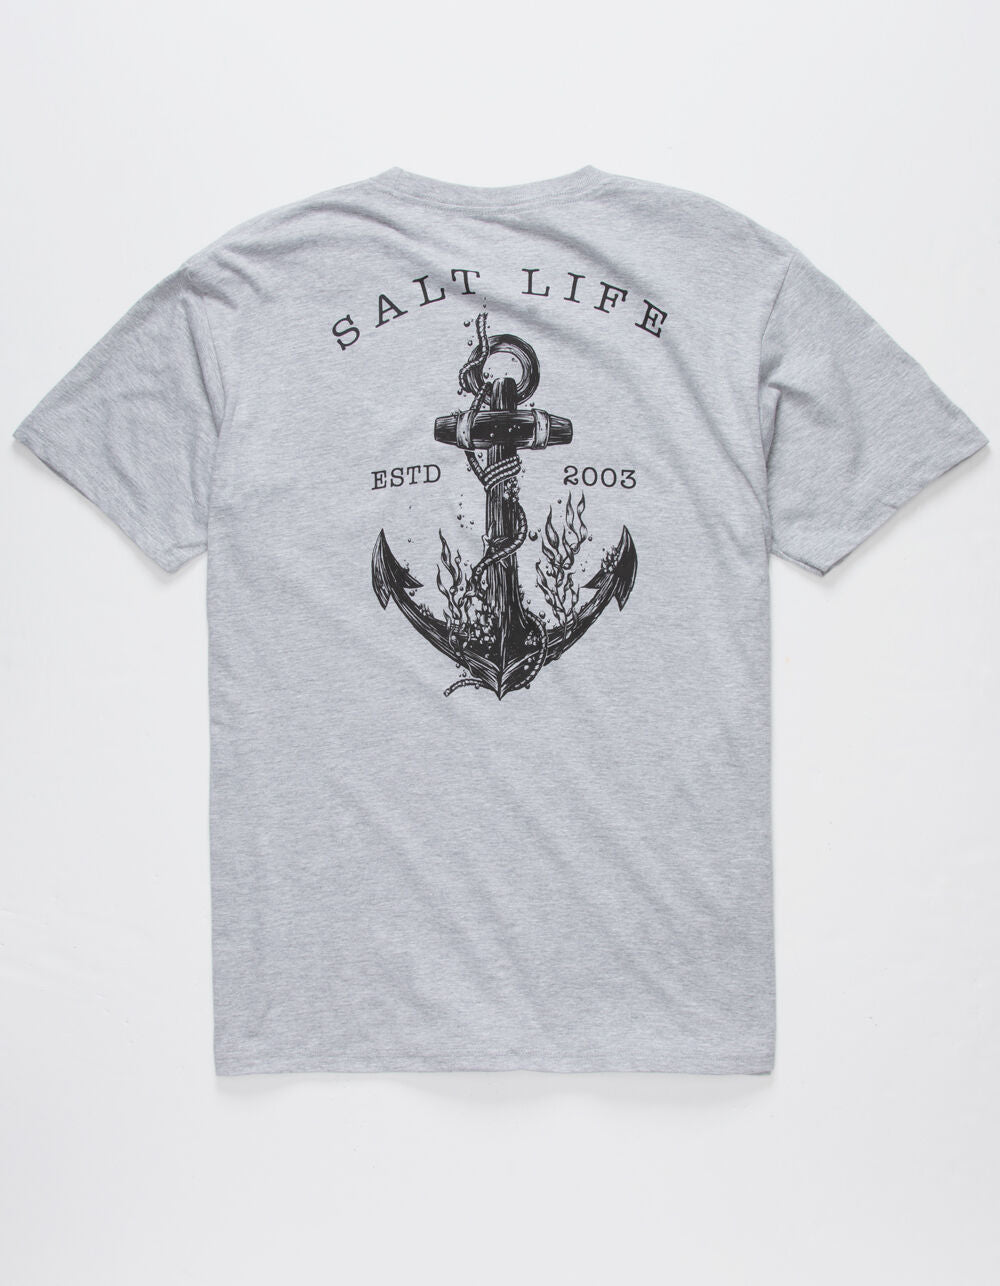 Salt Life Stay Anchored Youth Tee